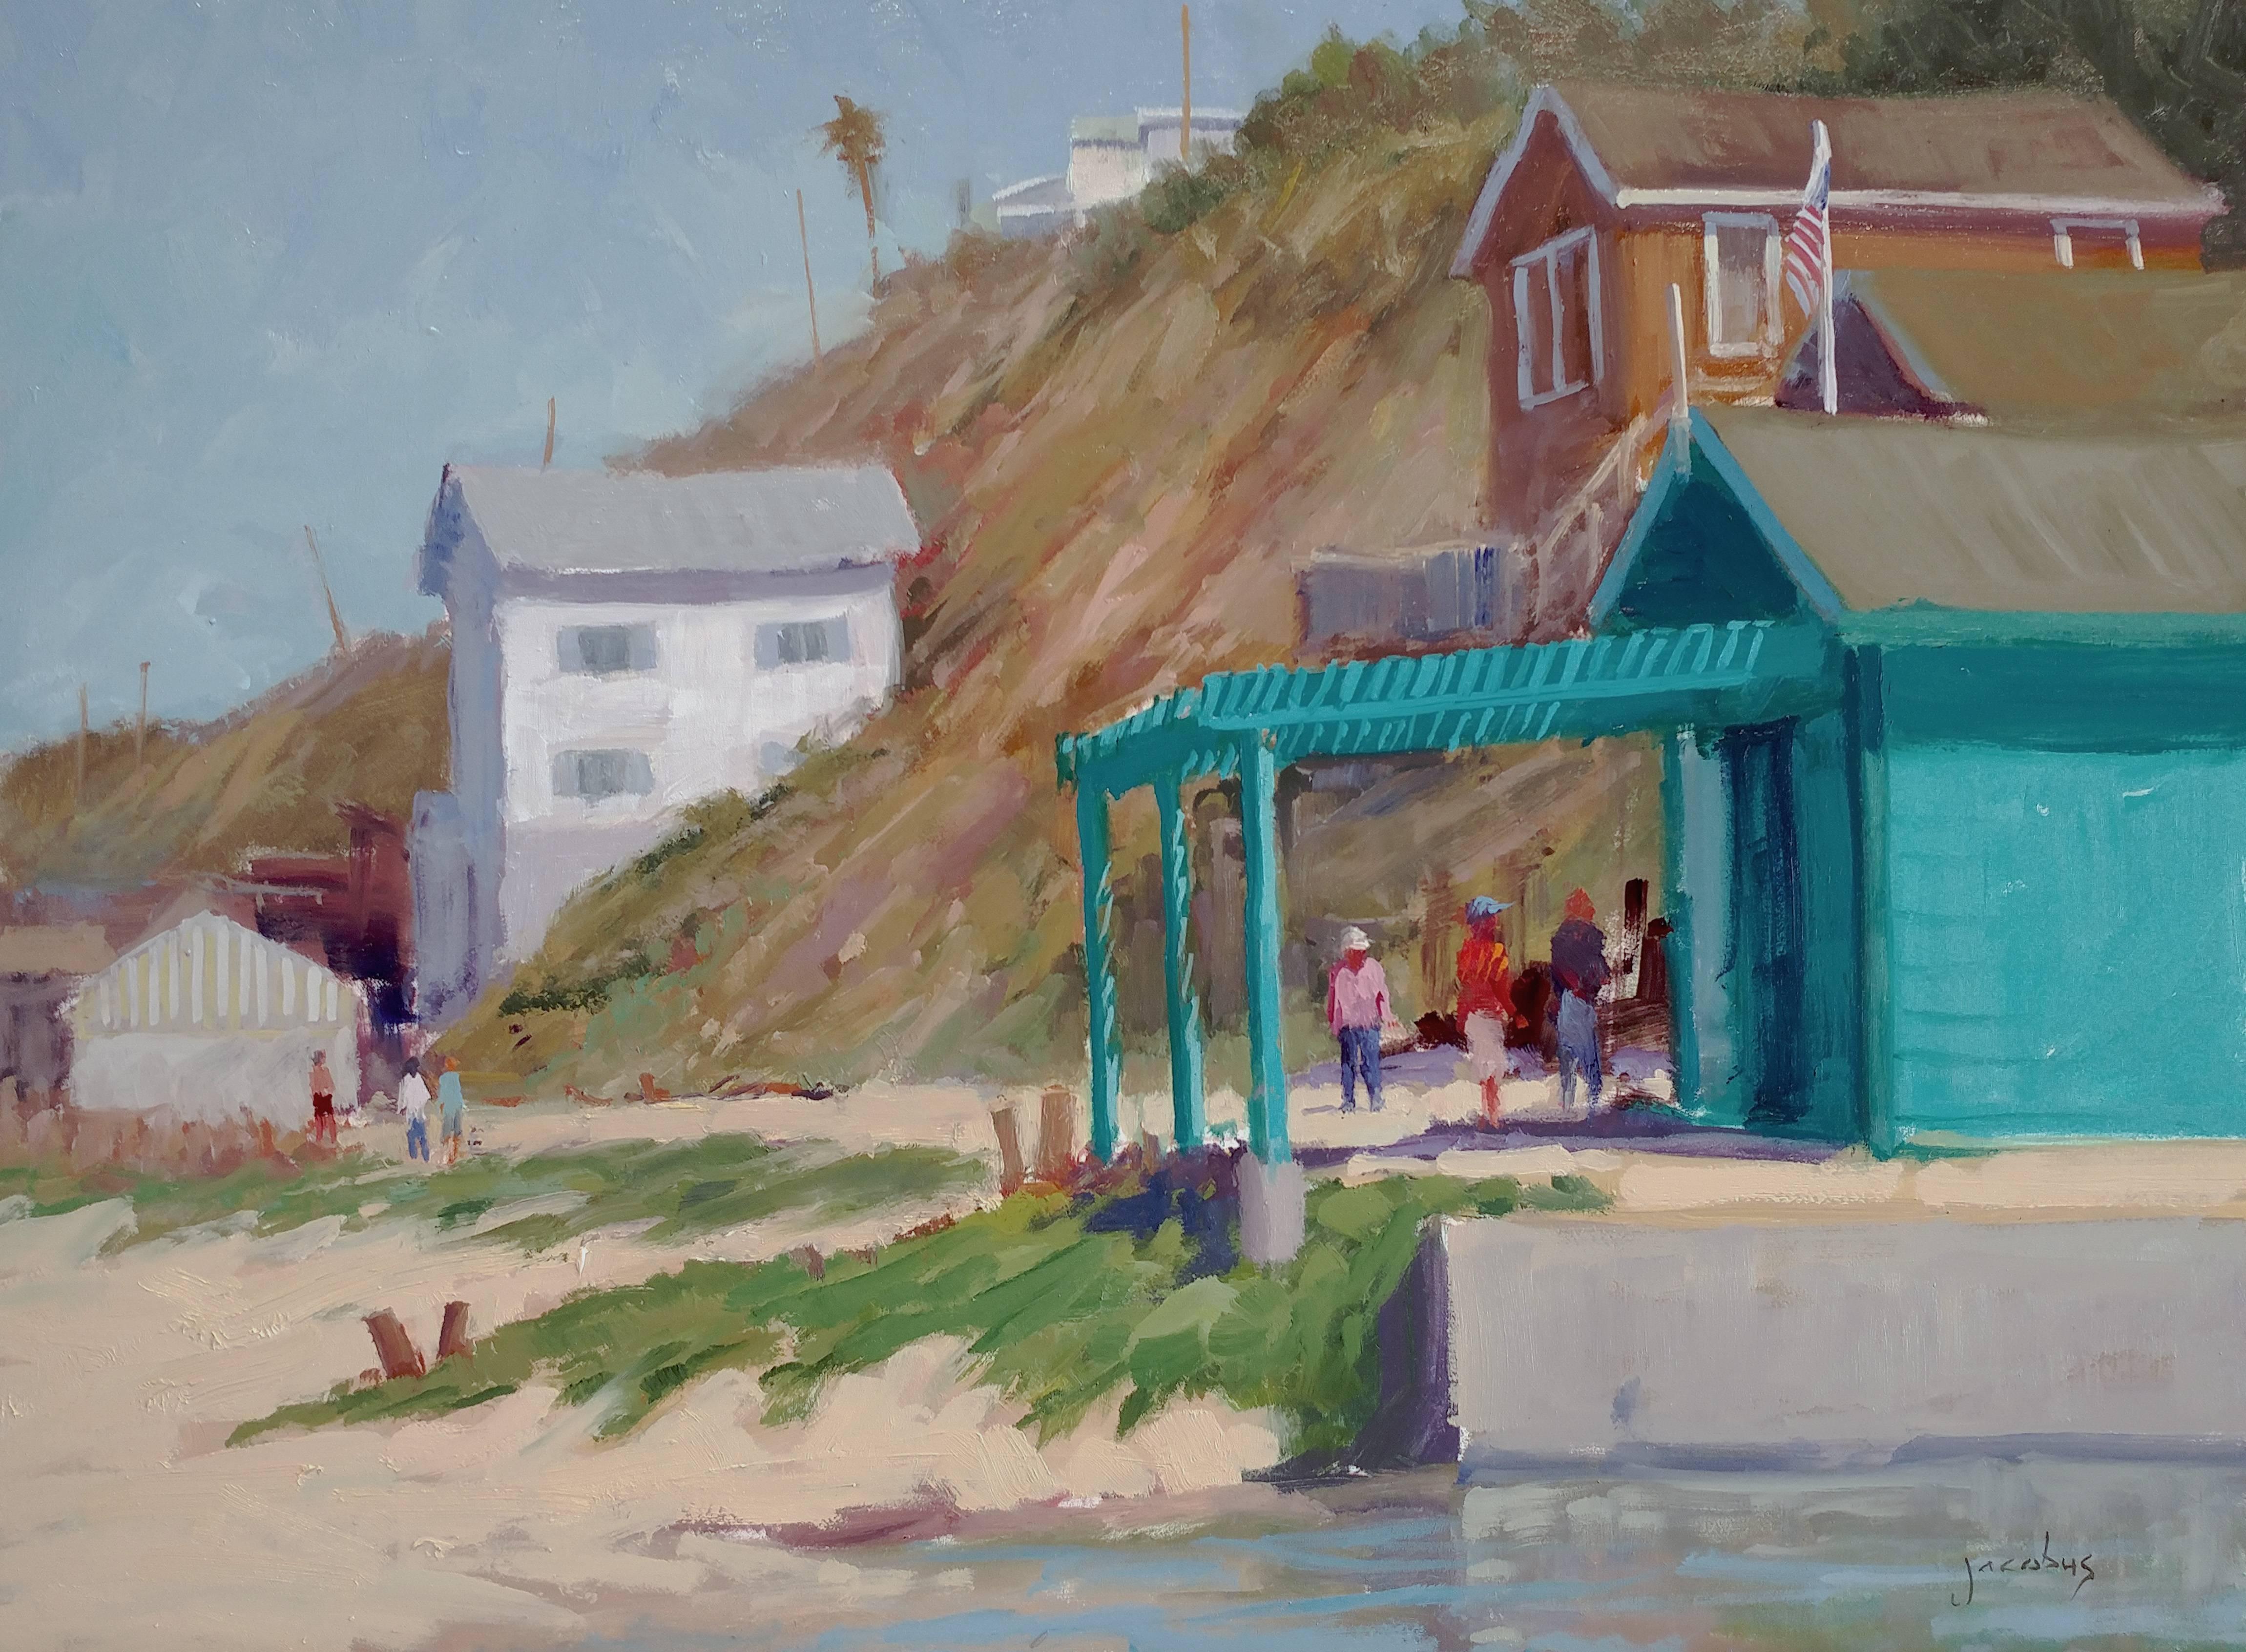 A sunny oil painted on location in Crystal Cove by noted California artist Jacobus Baas, this plein air painting "Waiting For Lunch" exhibits the subtle touch and beautiful light that the artist is known for.  Capturing the clarity of the coastal